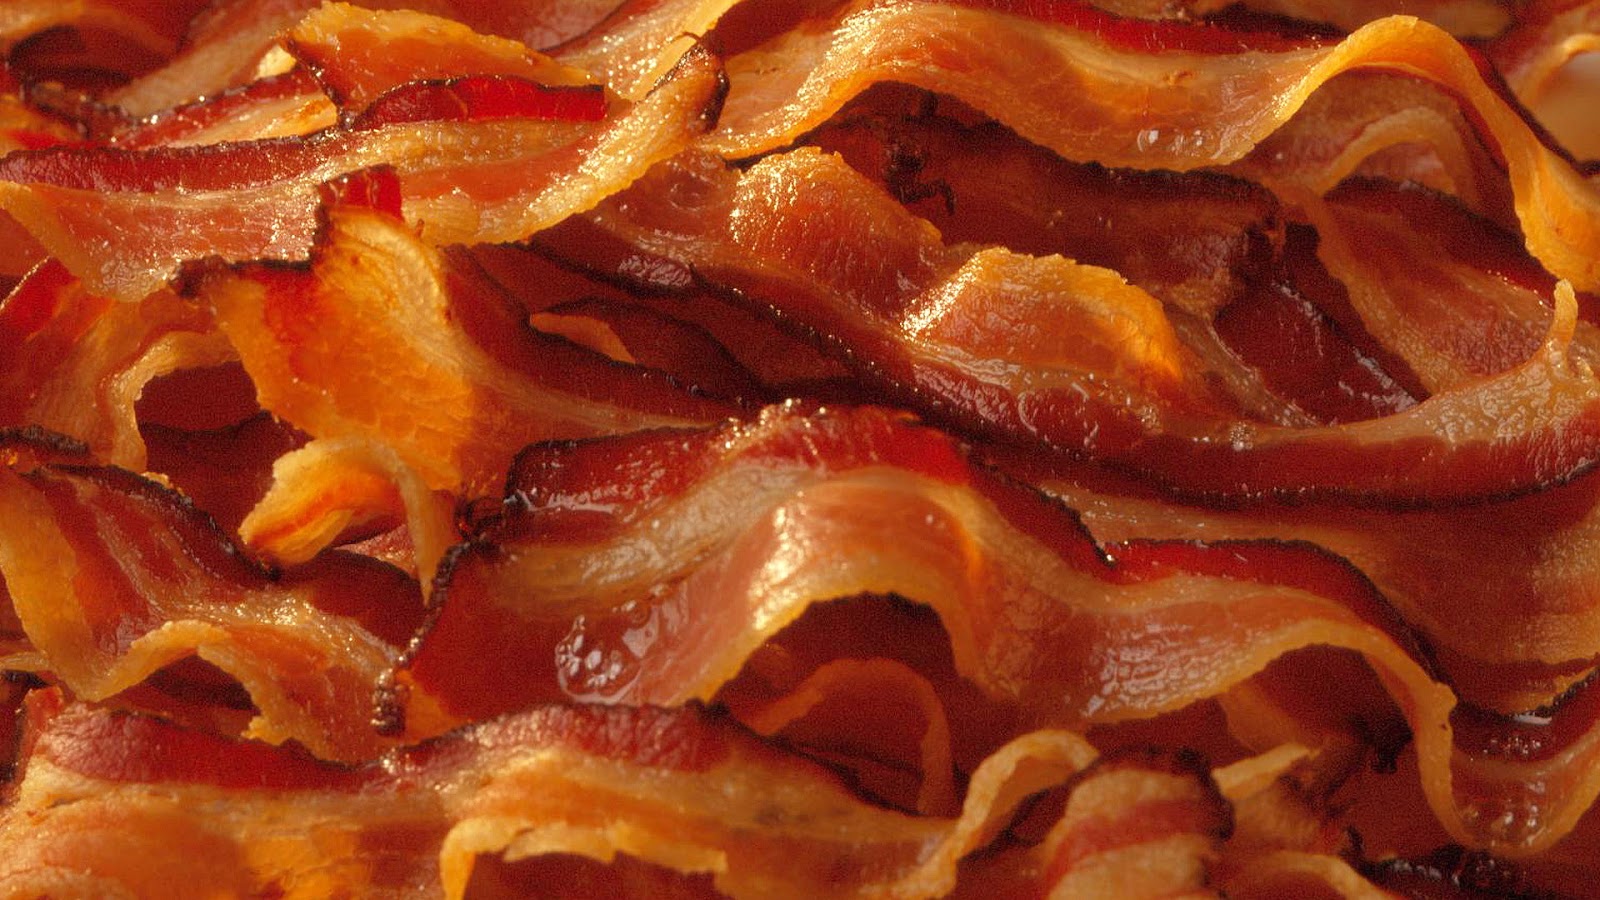 This Crunchy/Chewy Food Test Will Reveal Whether You’re Actually More Logical or Emotional bacon